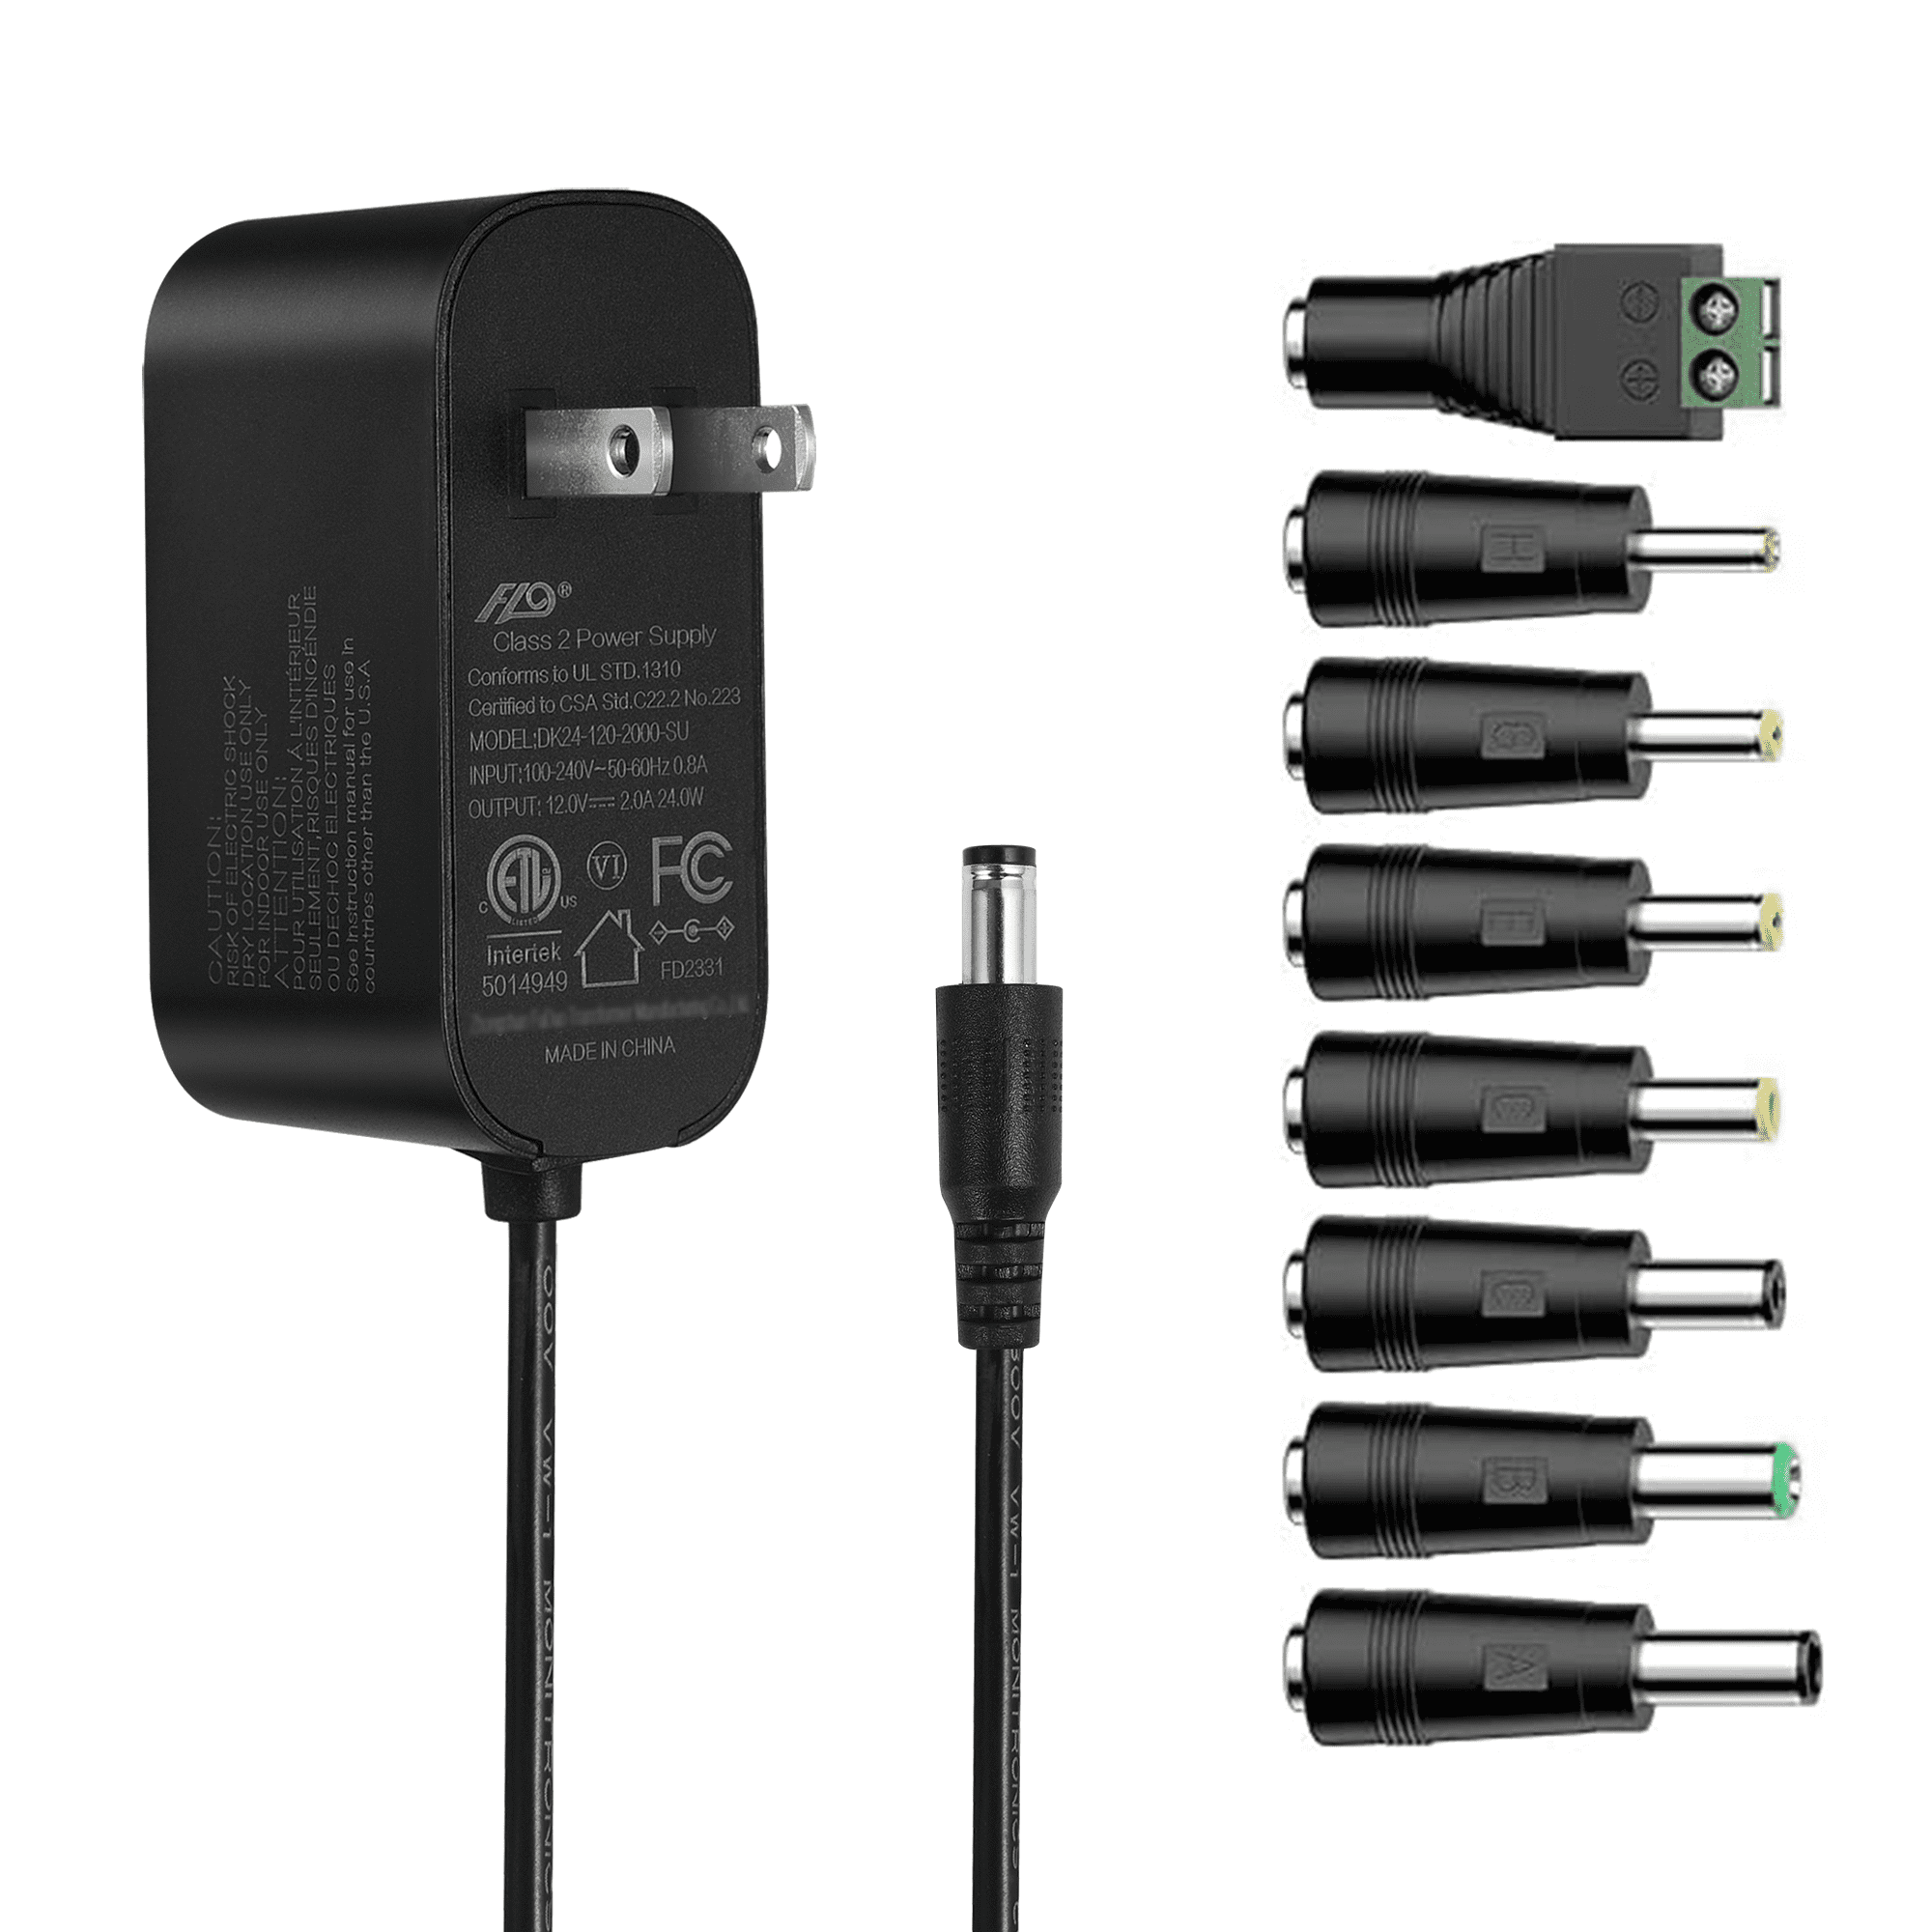  VSDISPLAY Power Adapter, AC 100-240V Input to 12V DC 2A Output,  Power Supply, US Plug, with Plug 5.5x2.1 mm / 3.5x1.35 mm Fit  SC24W-1202000U jhd-ap024u-120200ba-a, Fit for VSDISPLAY Controller Board 